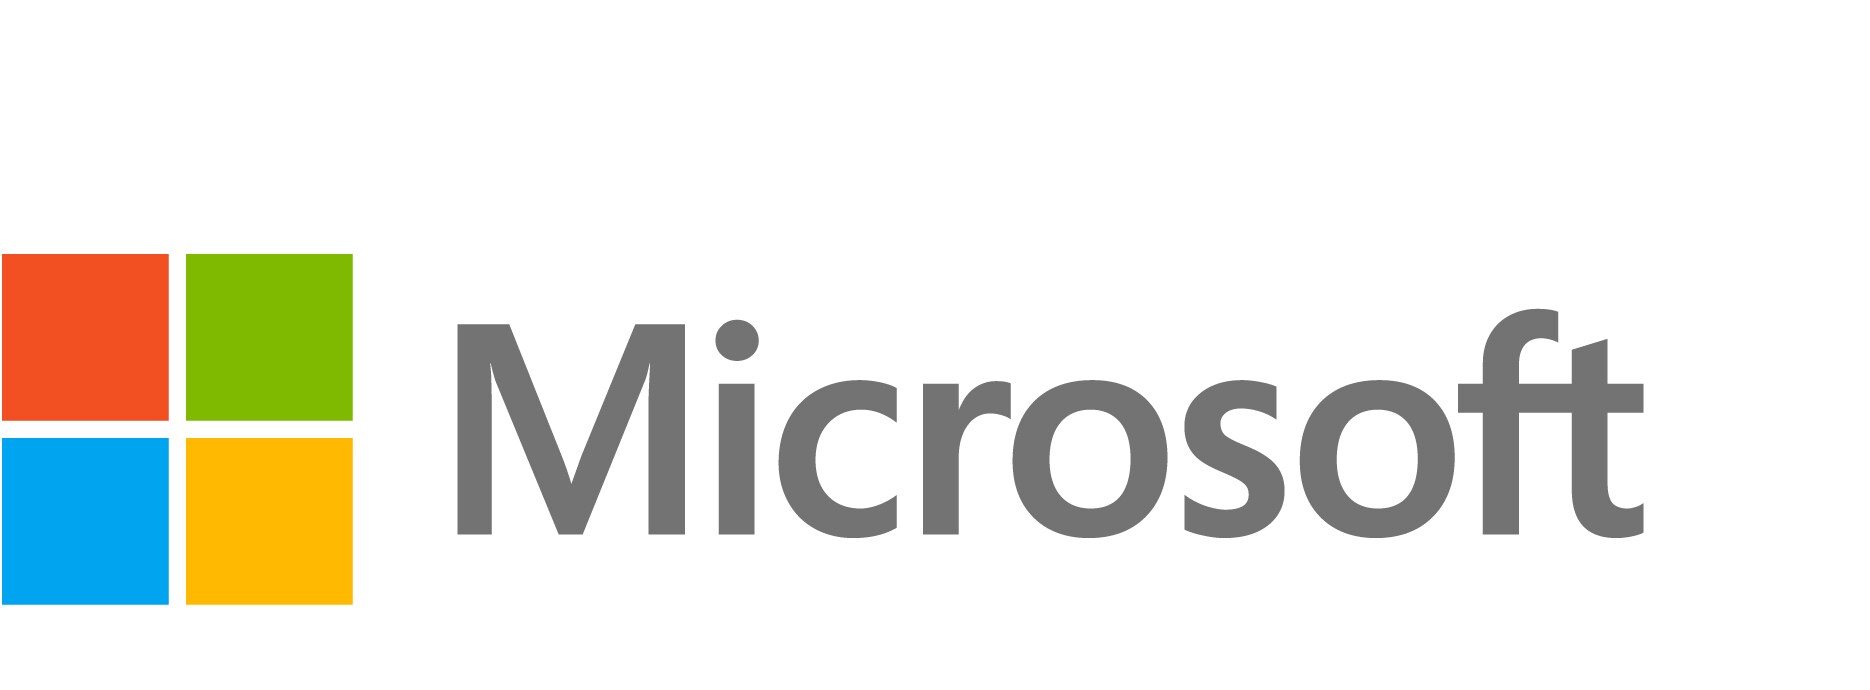 Microsoft Power Pages - subscription license (1 year) - 100 authenticated users per web site